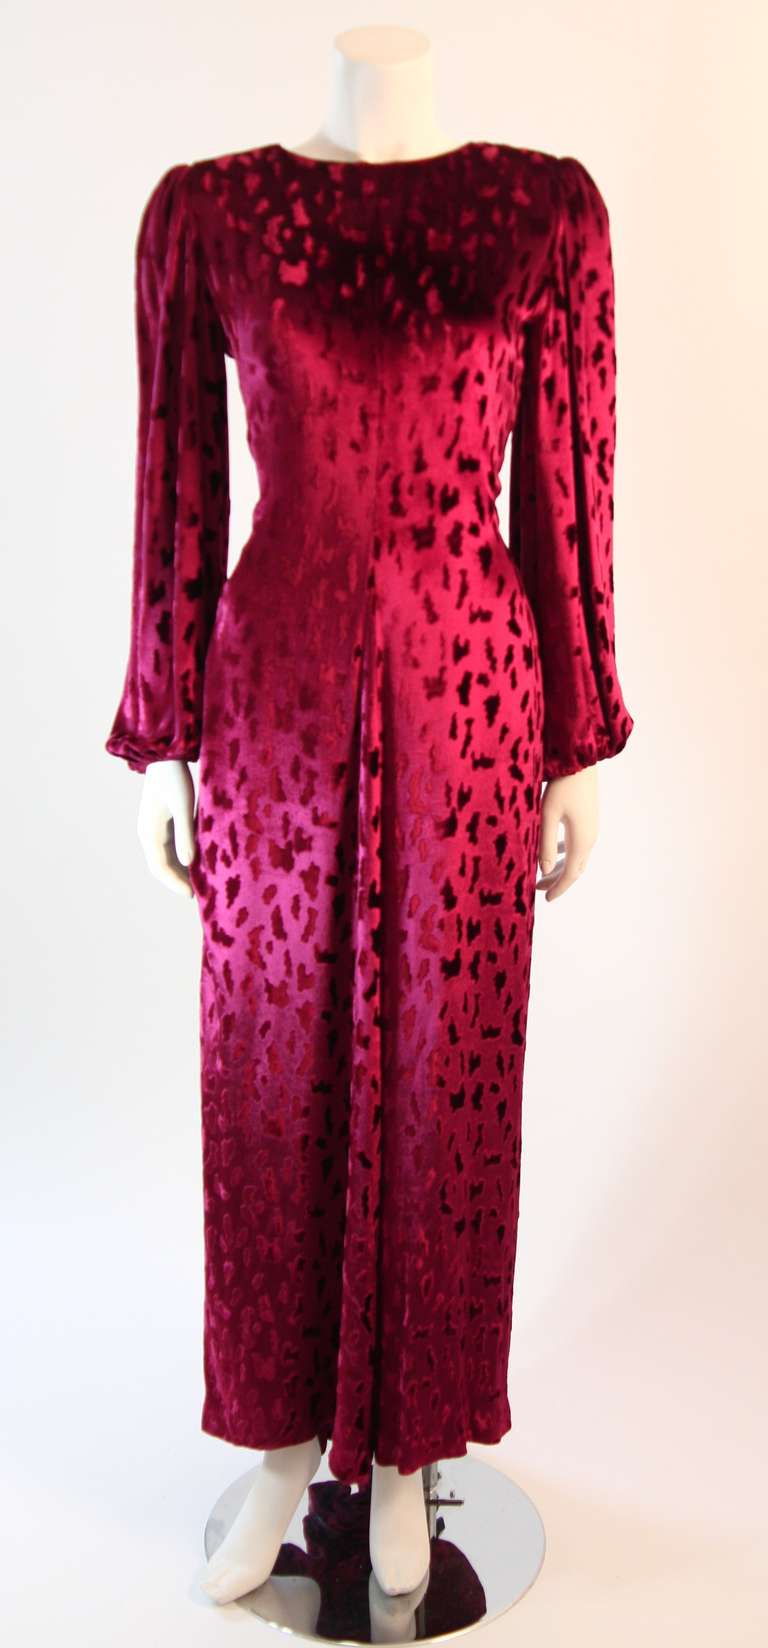 This is a spectacular Oscar De La Renta gown. The gown features a wonderful velvet texture in a beautiful cranberry color. The deep plunging 